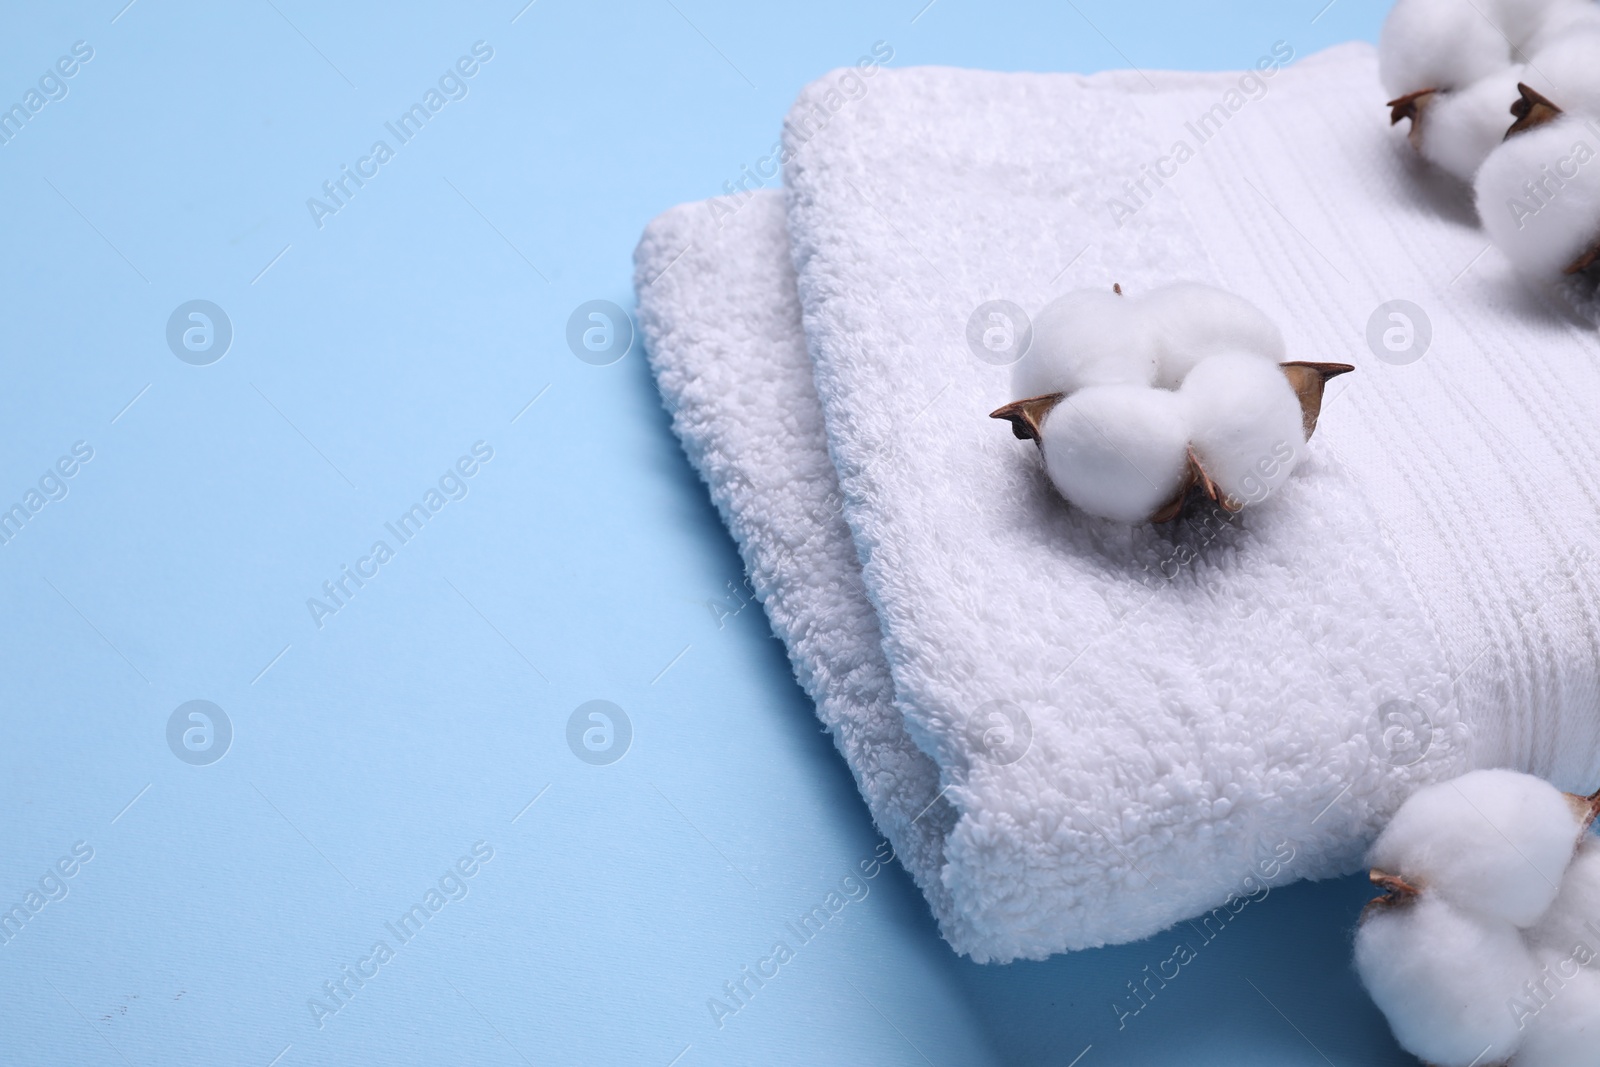 Photo of Fluffy cotton flowers and white terry towel on light blue background, closeup. Space for text